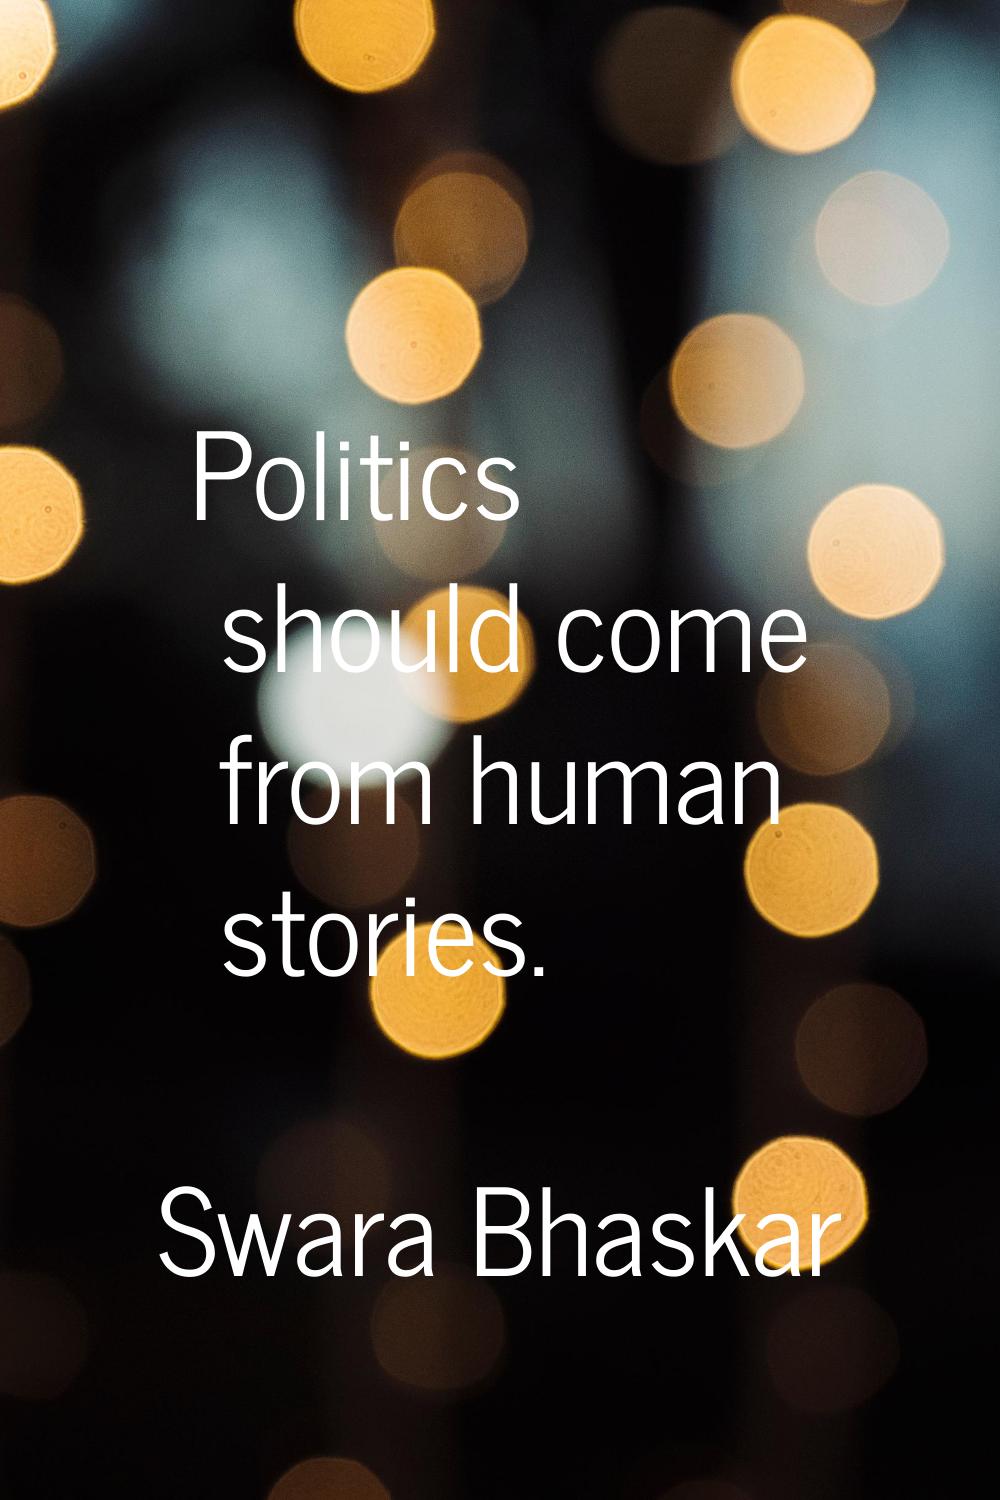 Politics should come from human stories.